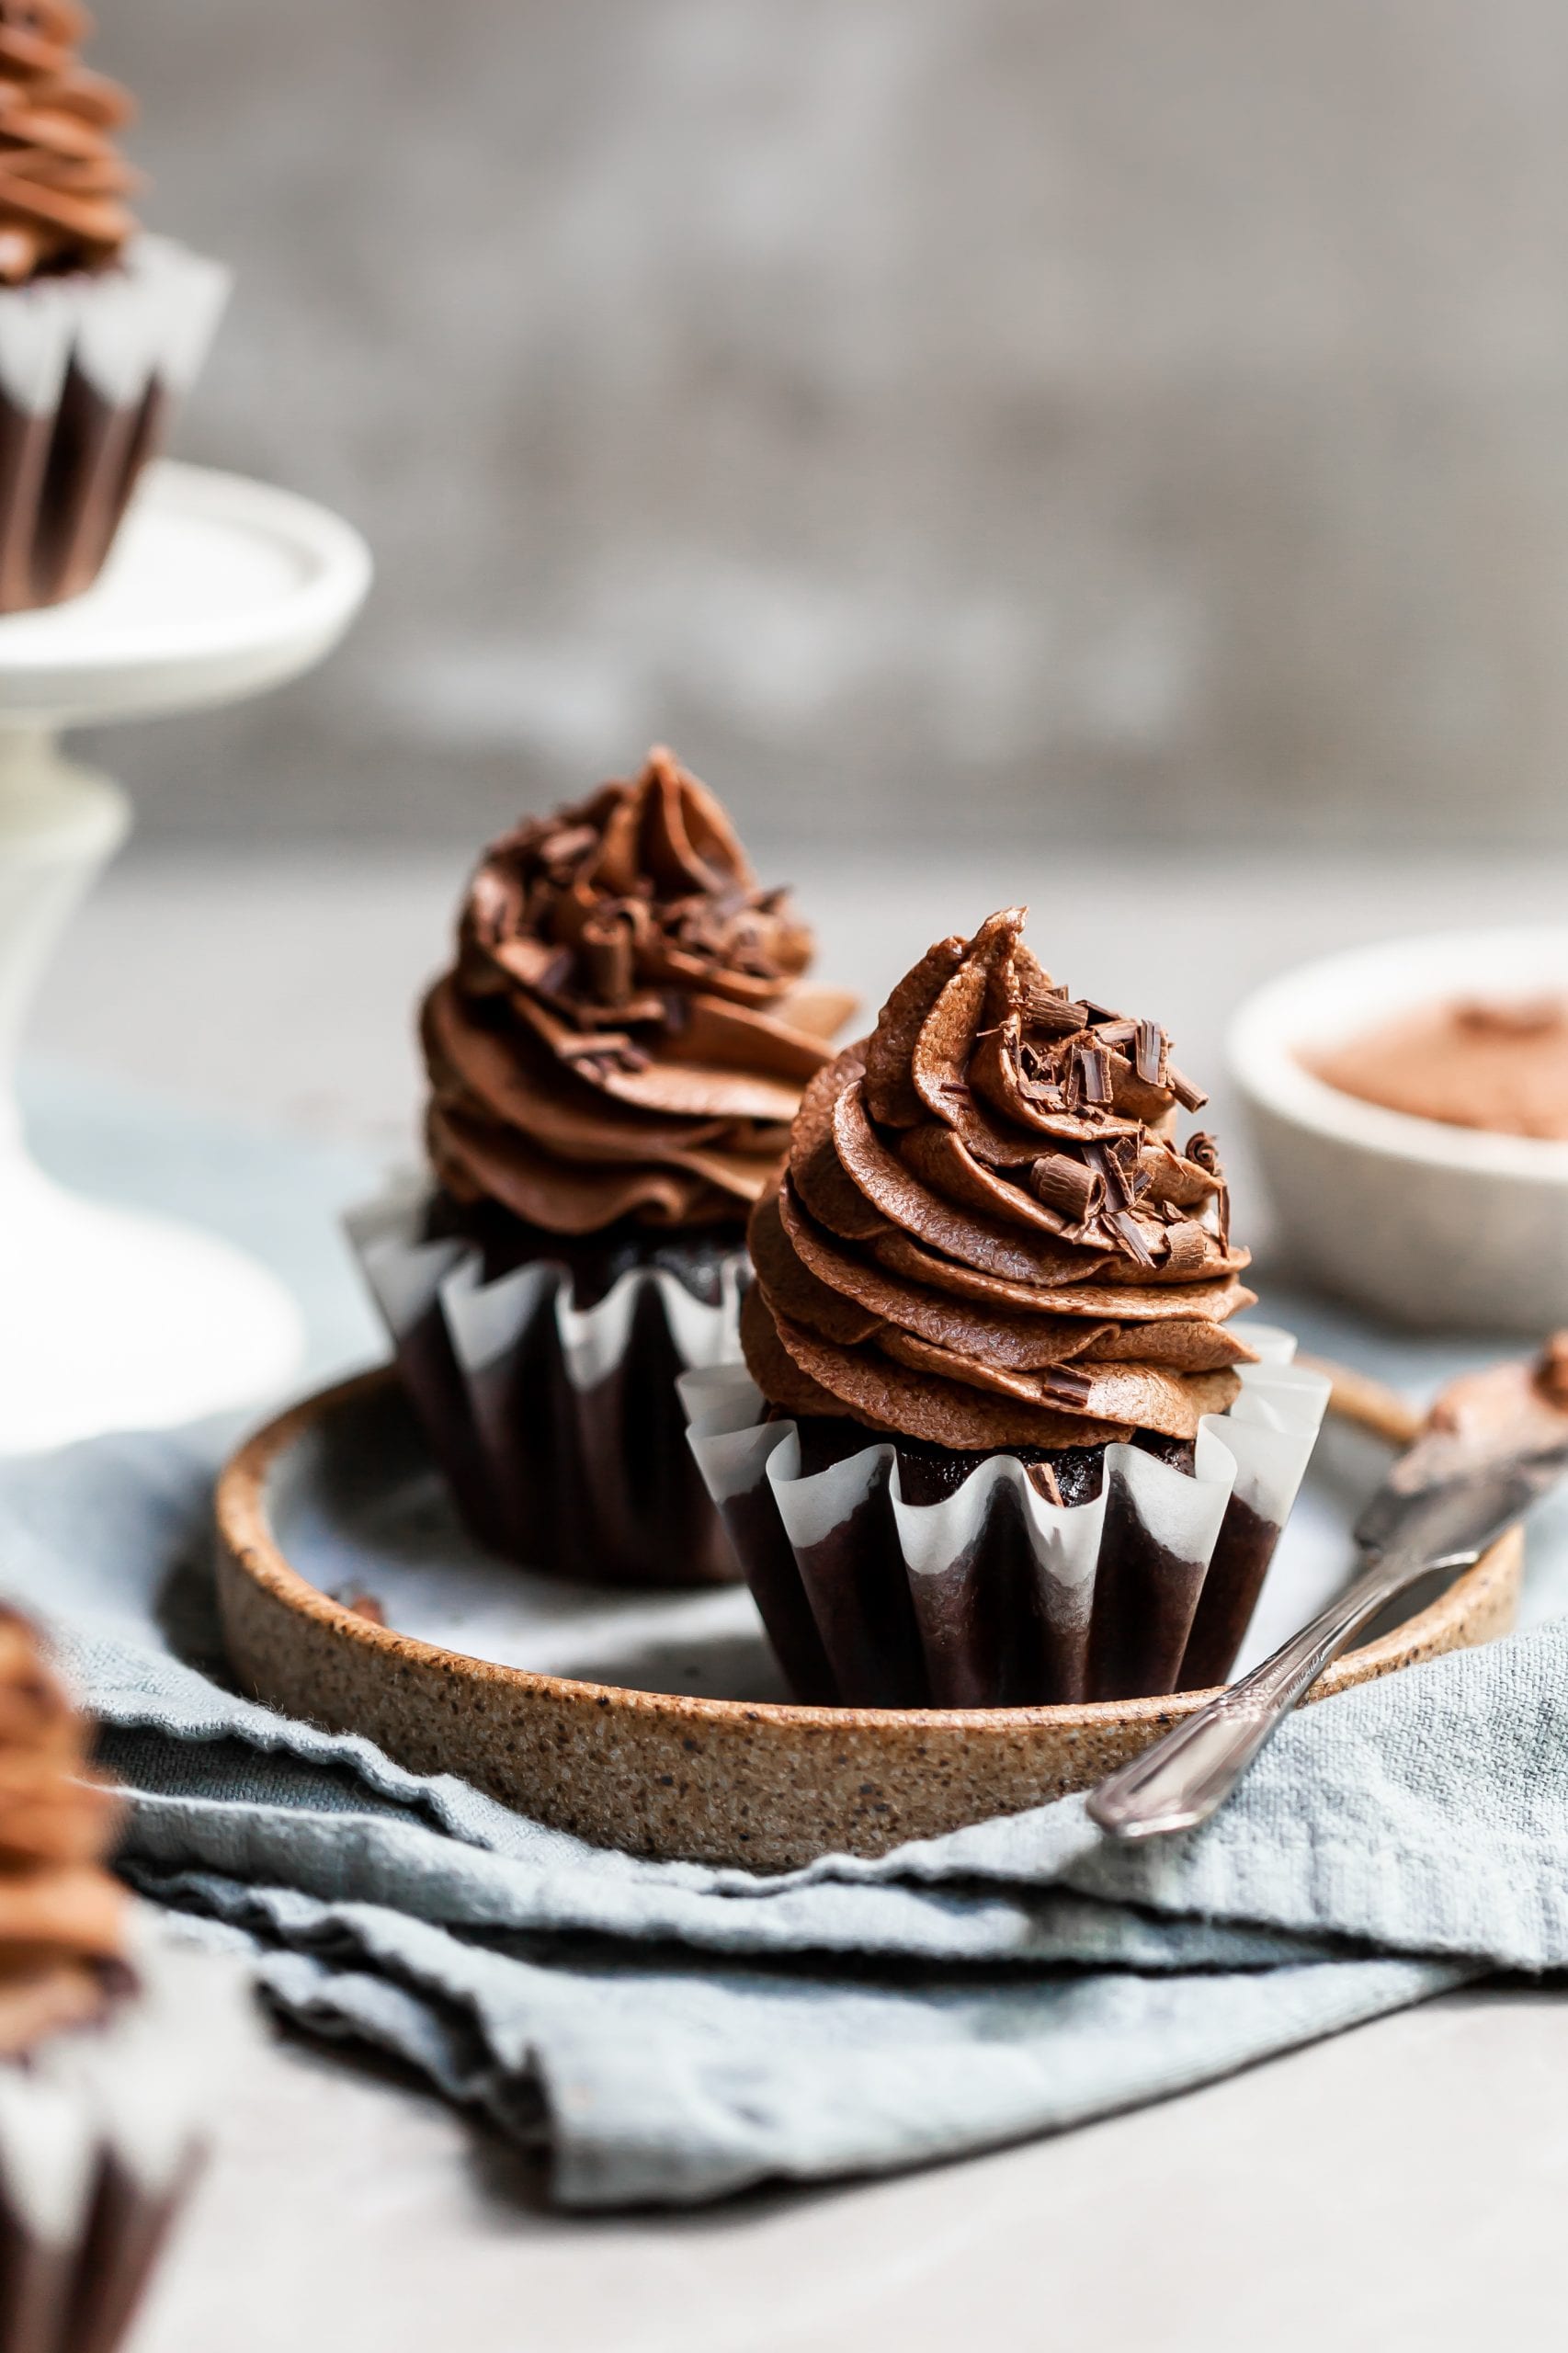 Vegan Chocolate Cupcakes with Fluffy Chocolate Ganache Frosting